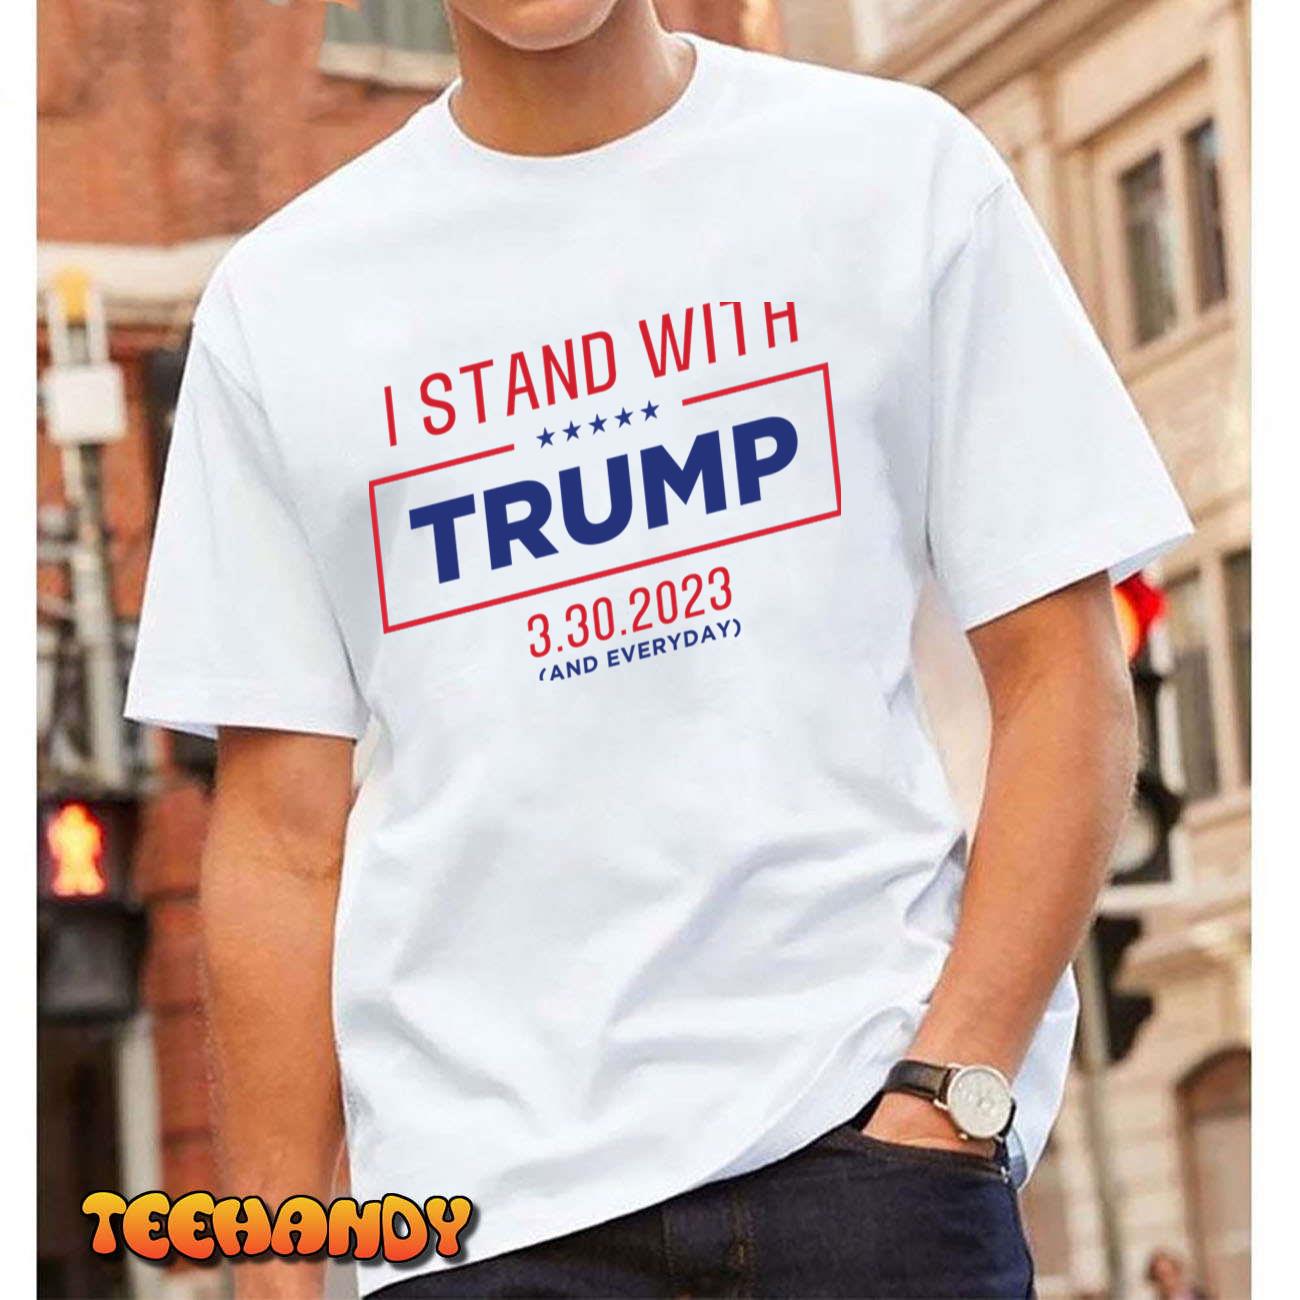 I Stand with Trump 3.30.2023 T-Shirt